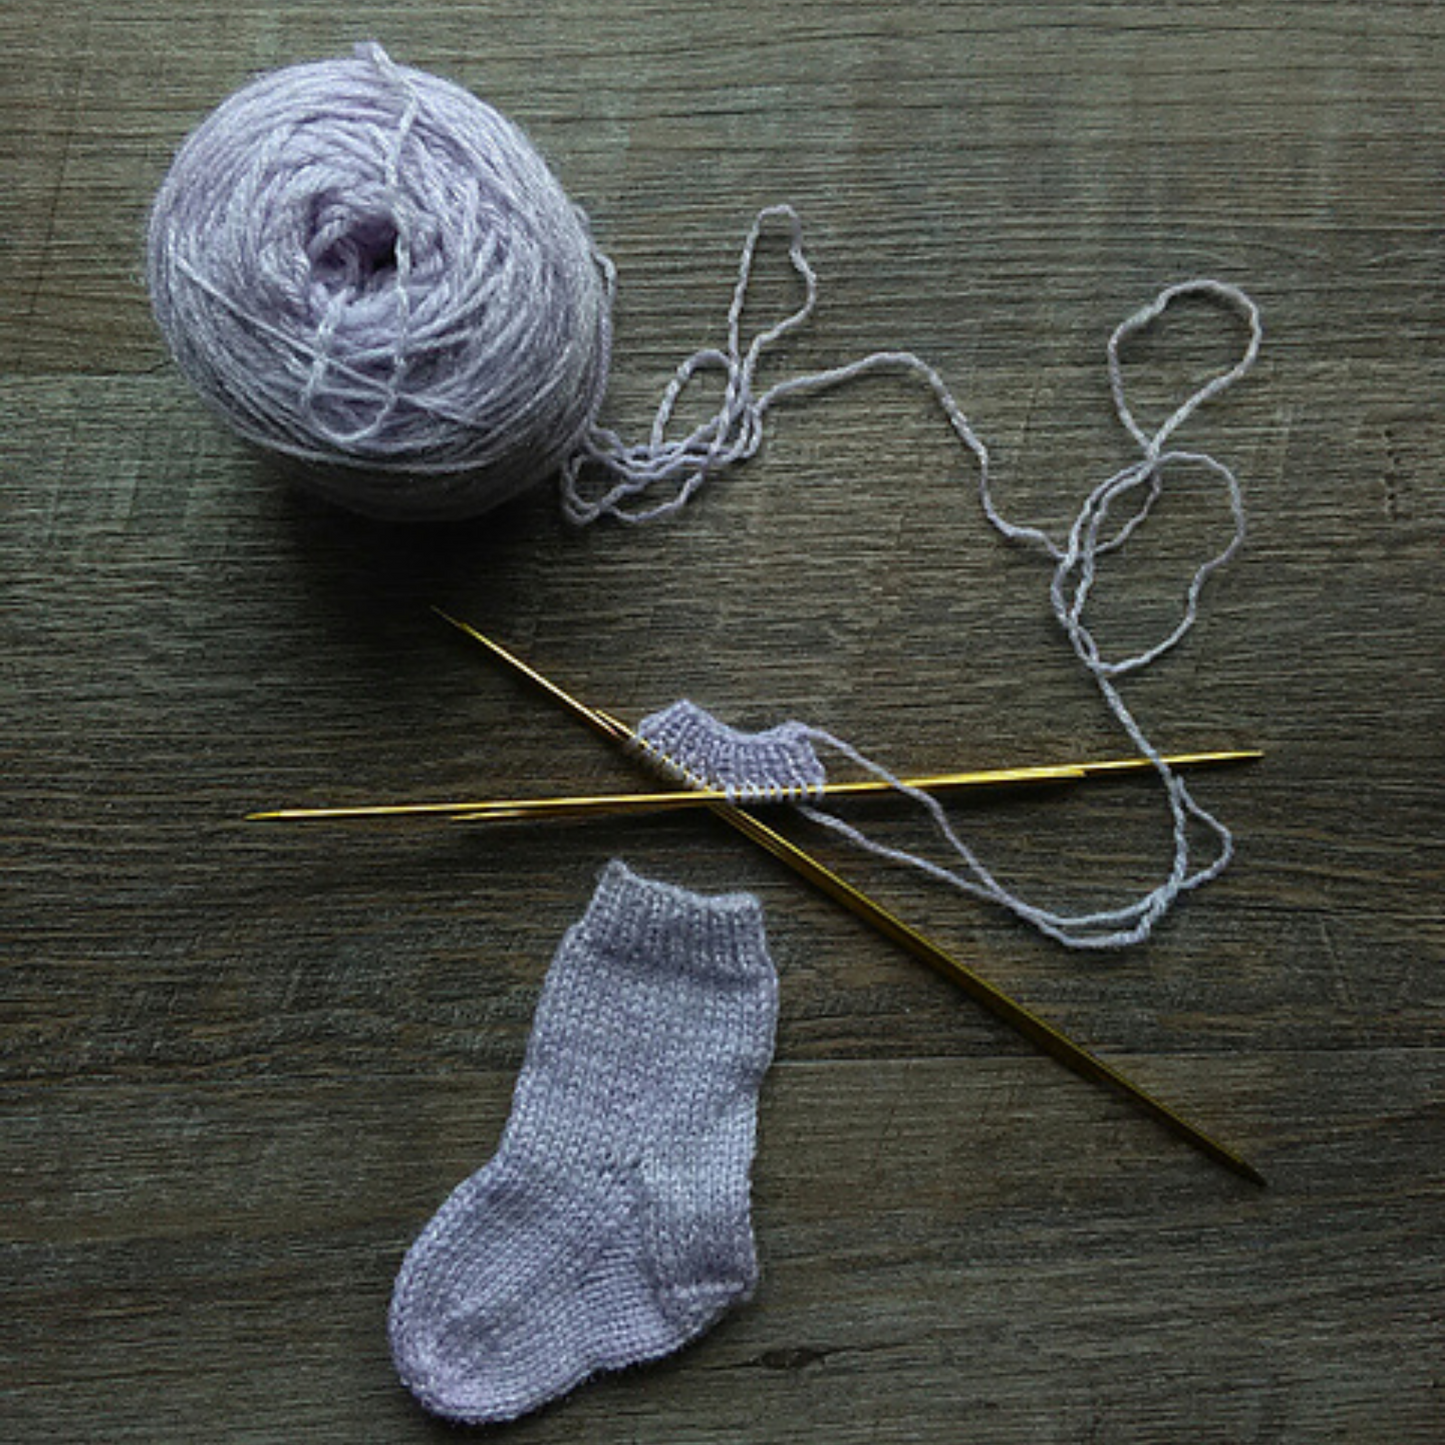 The "Perfect" Baby Sock by Denine